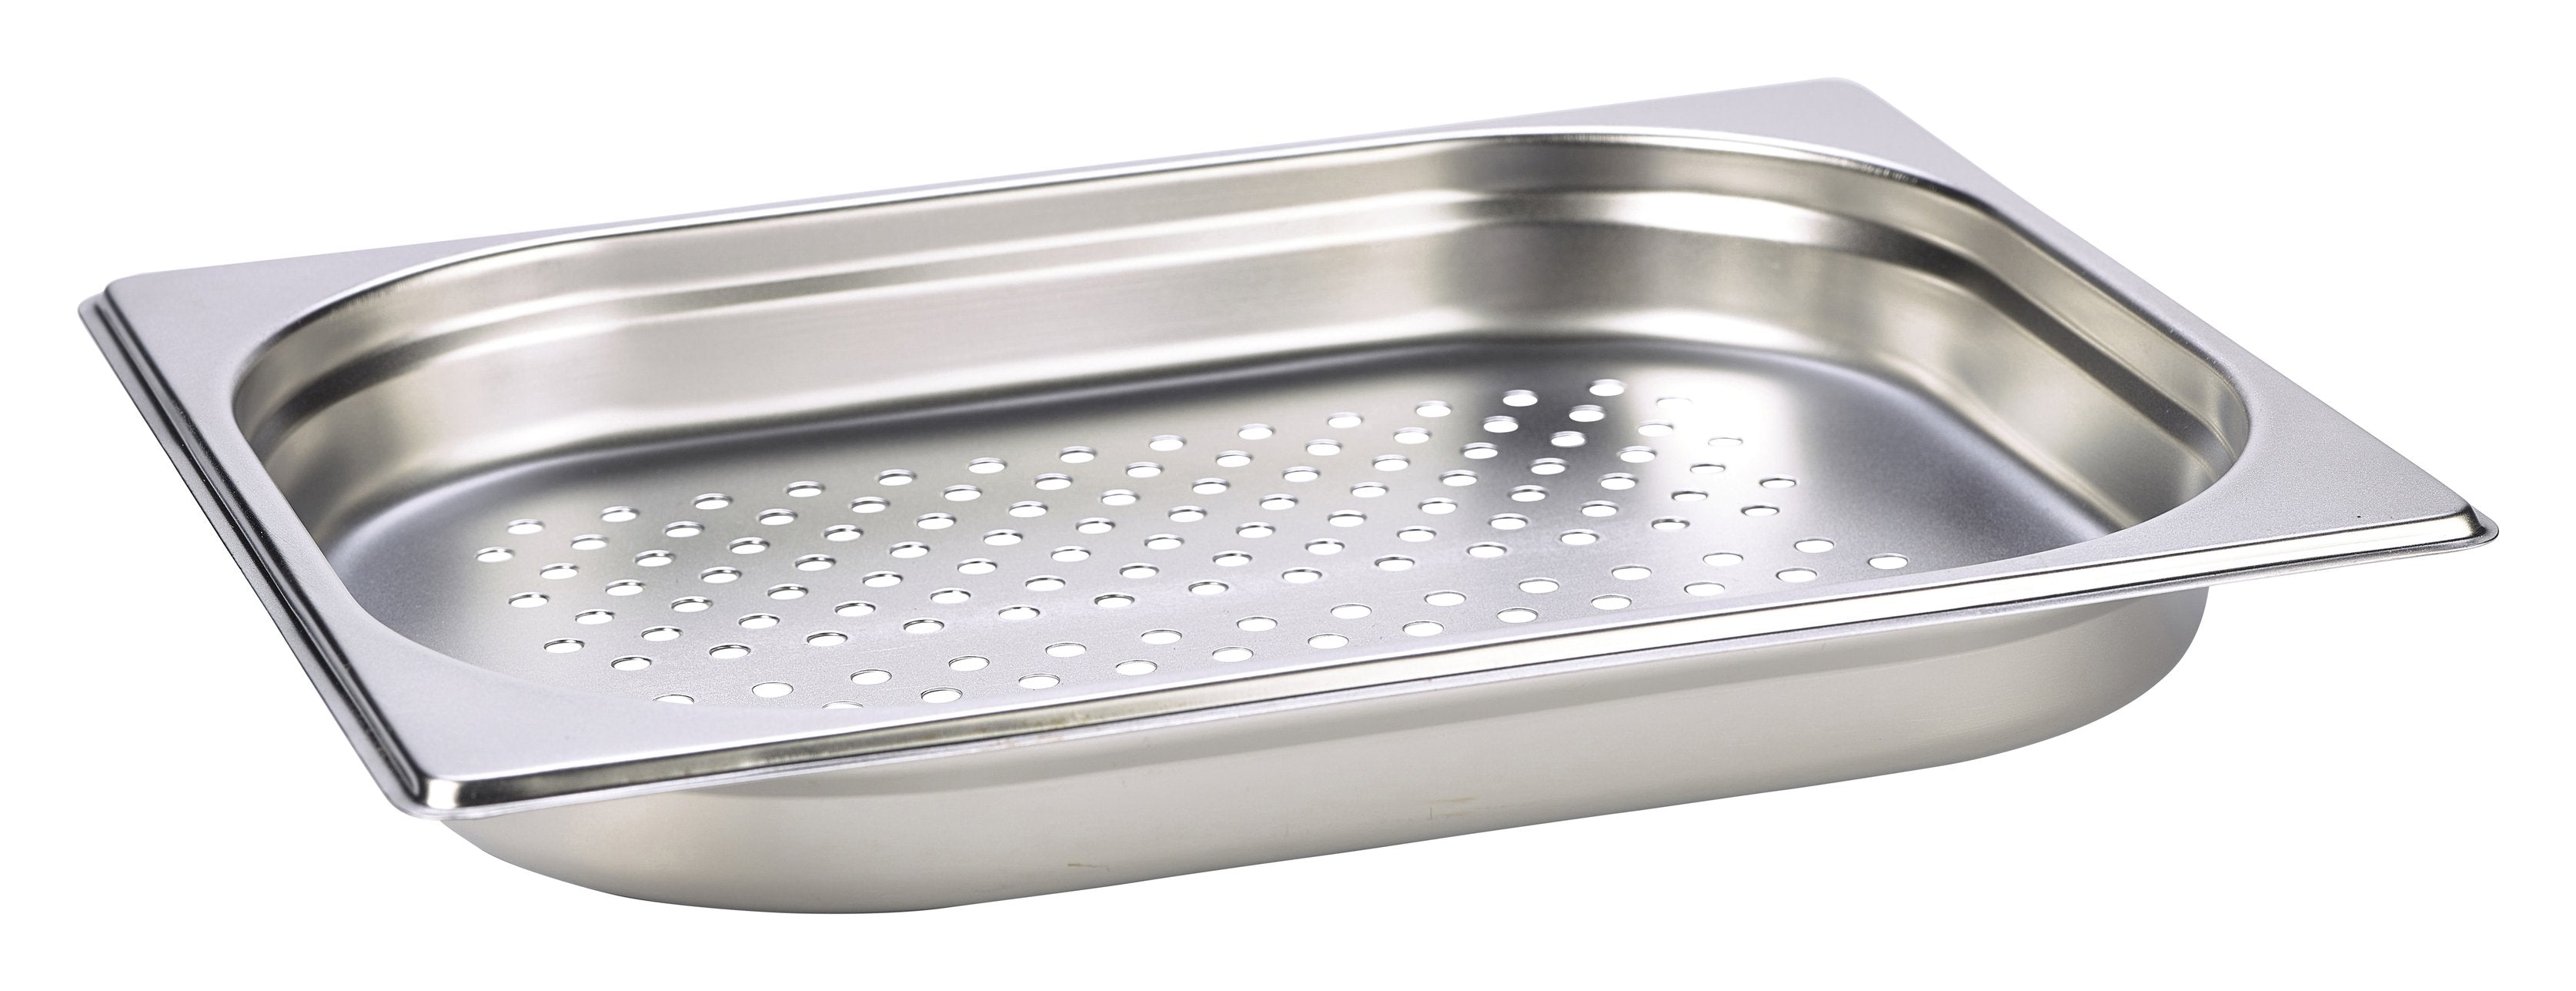 Perforated St/St Gastronorm Pan 1/2 - 40mm Deep